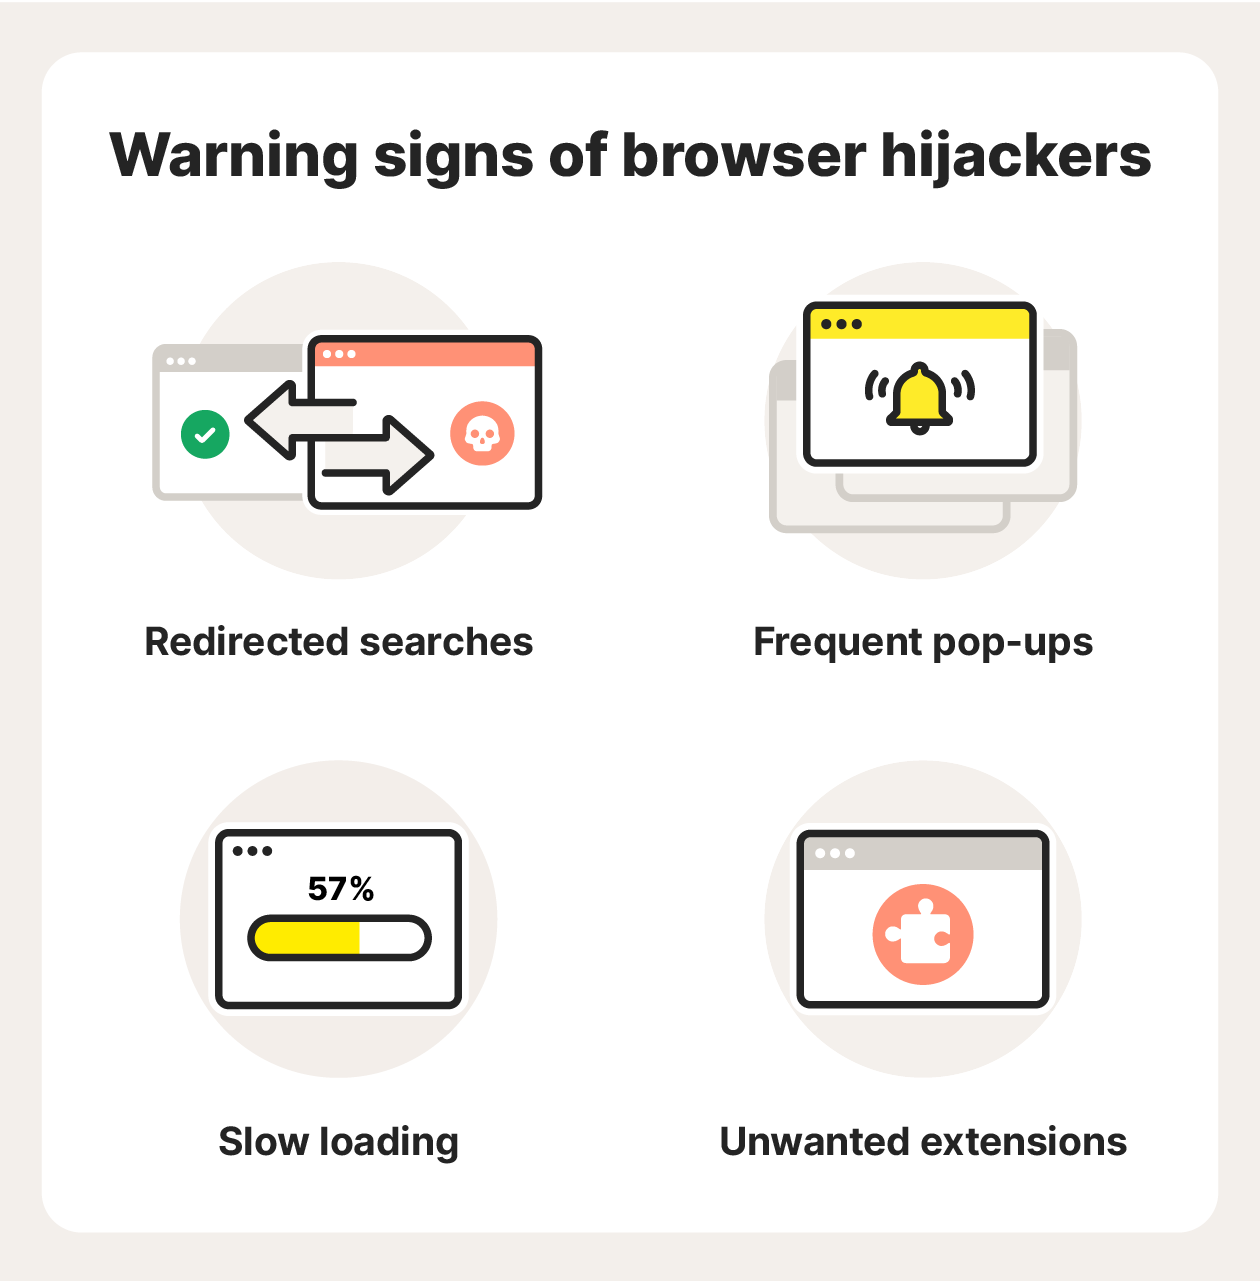 An illustration showing 4 warning signs of browser hijackers.